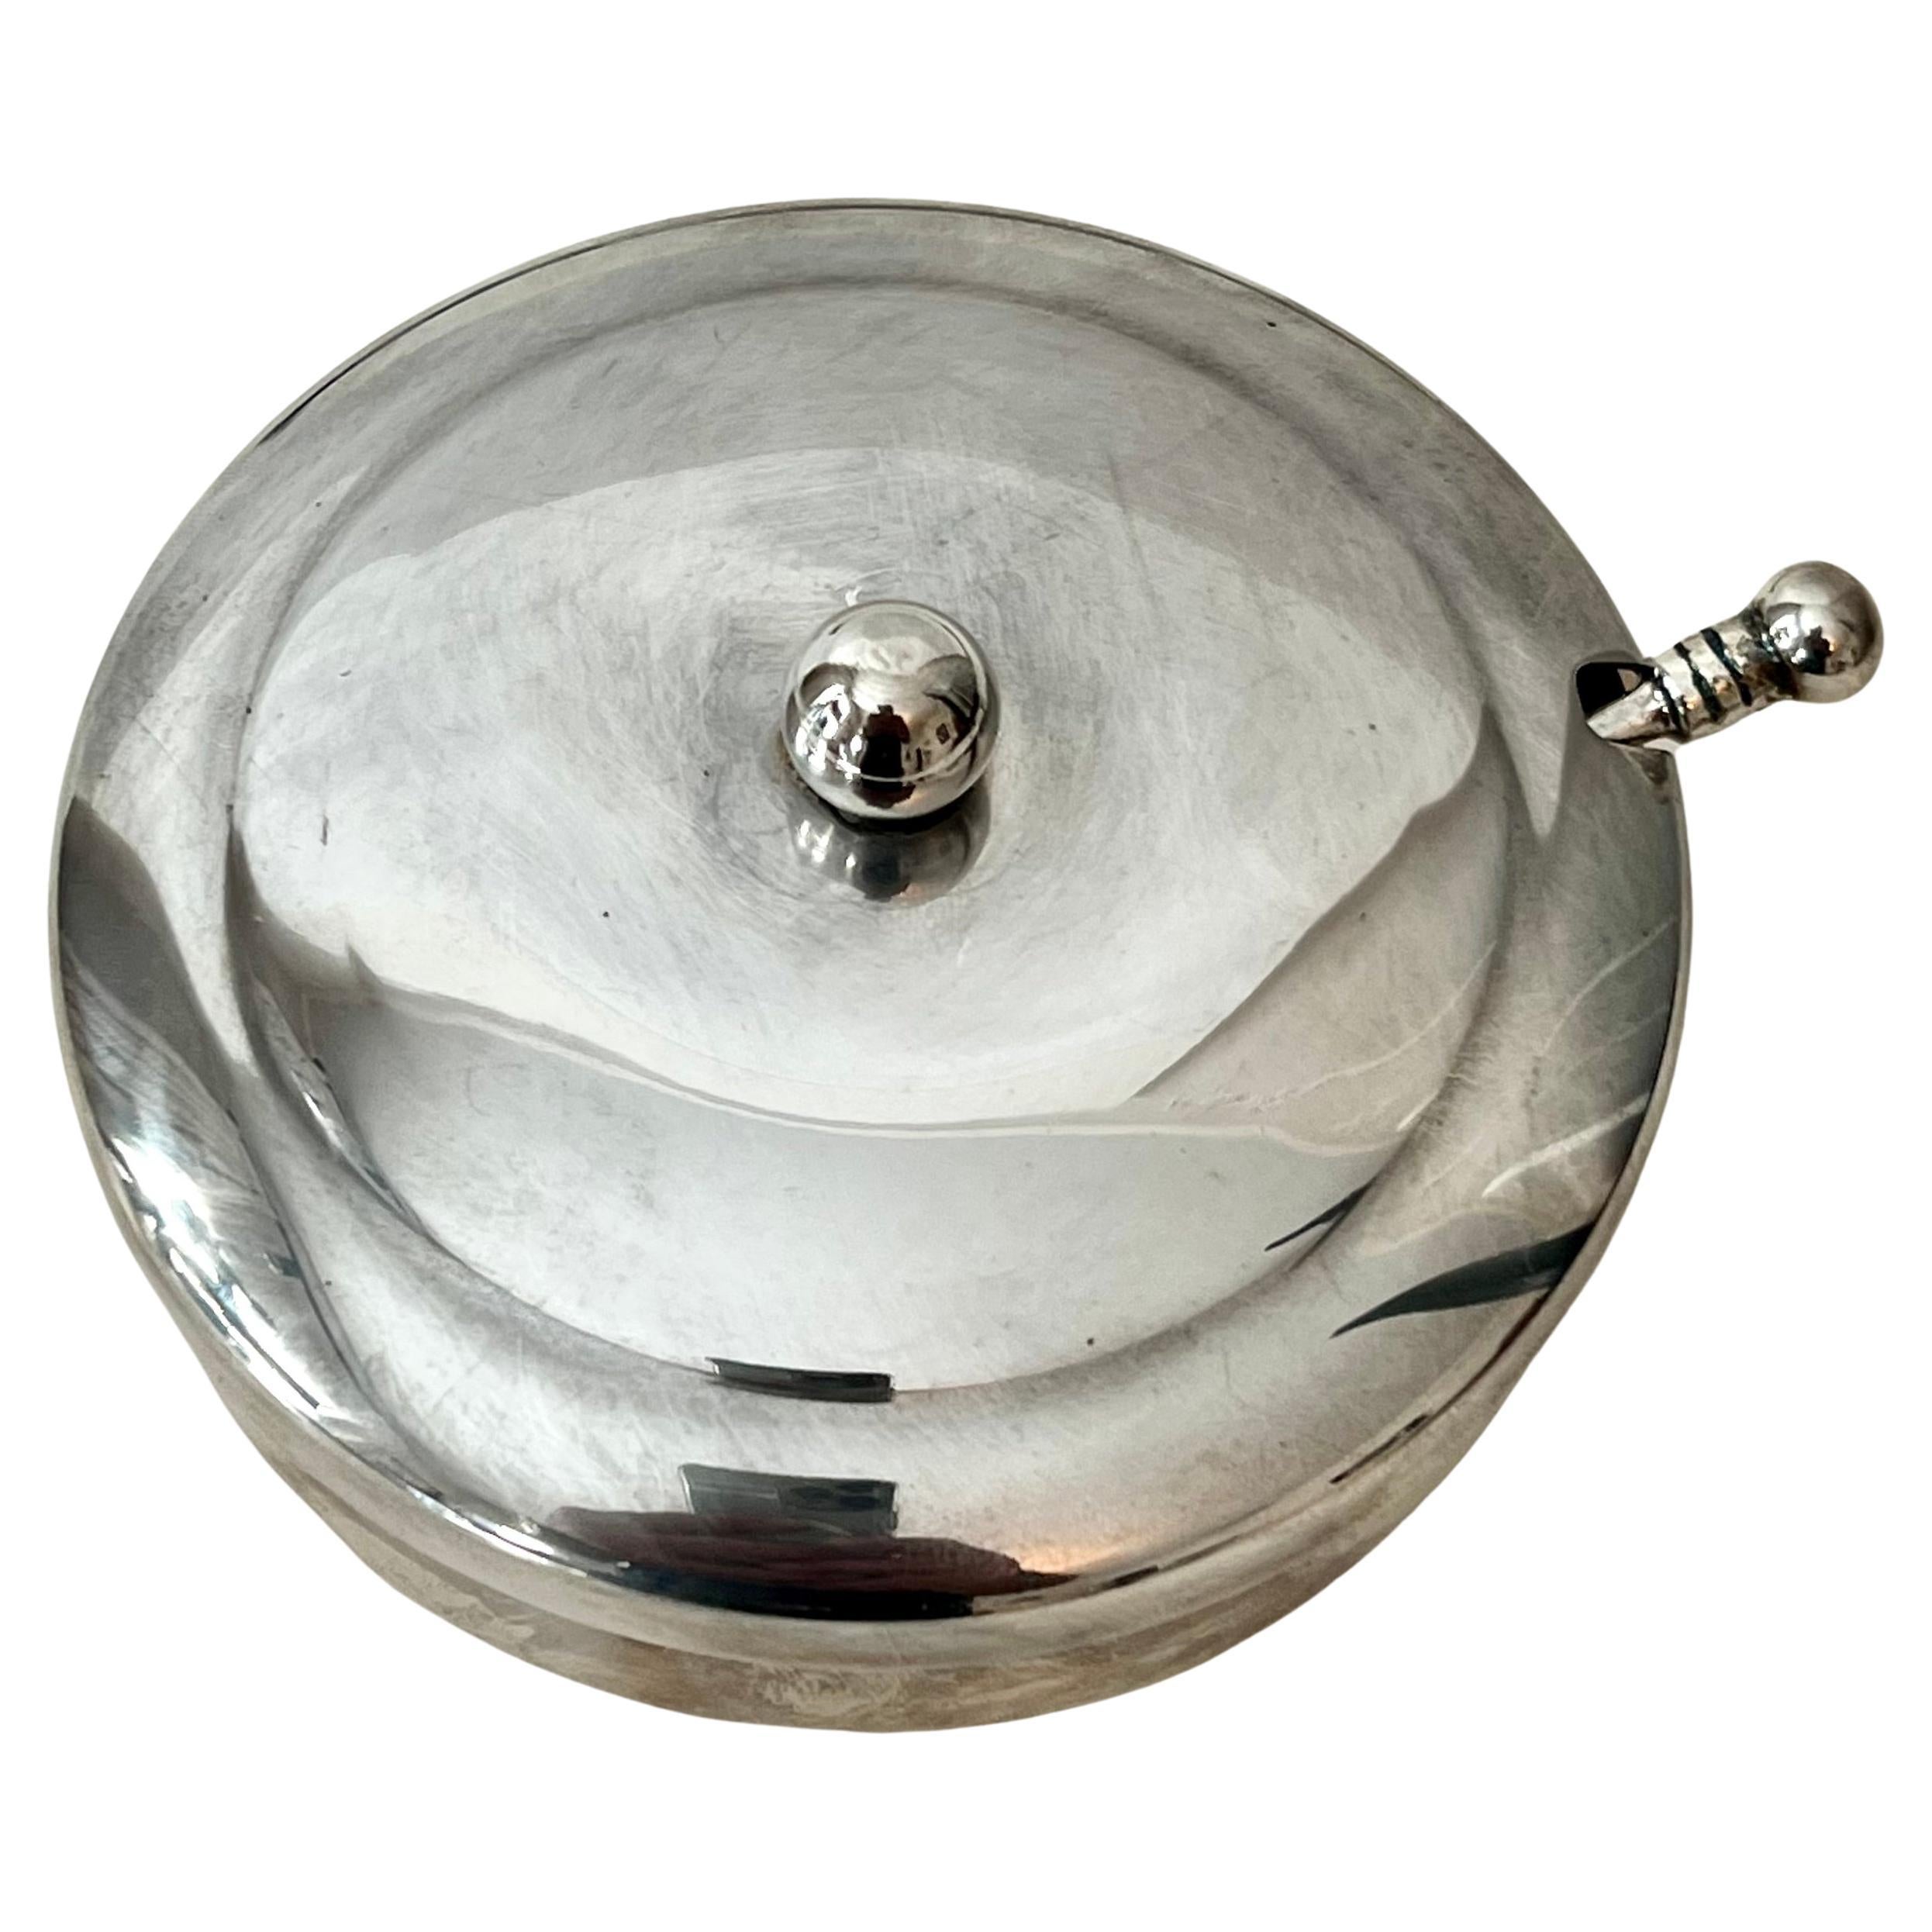 Silverplate Sugar or Condiment Bowl with Spoon